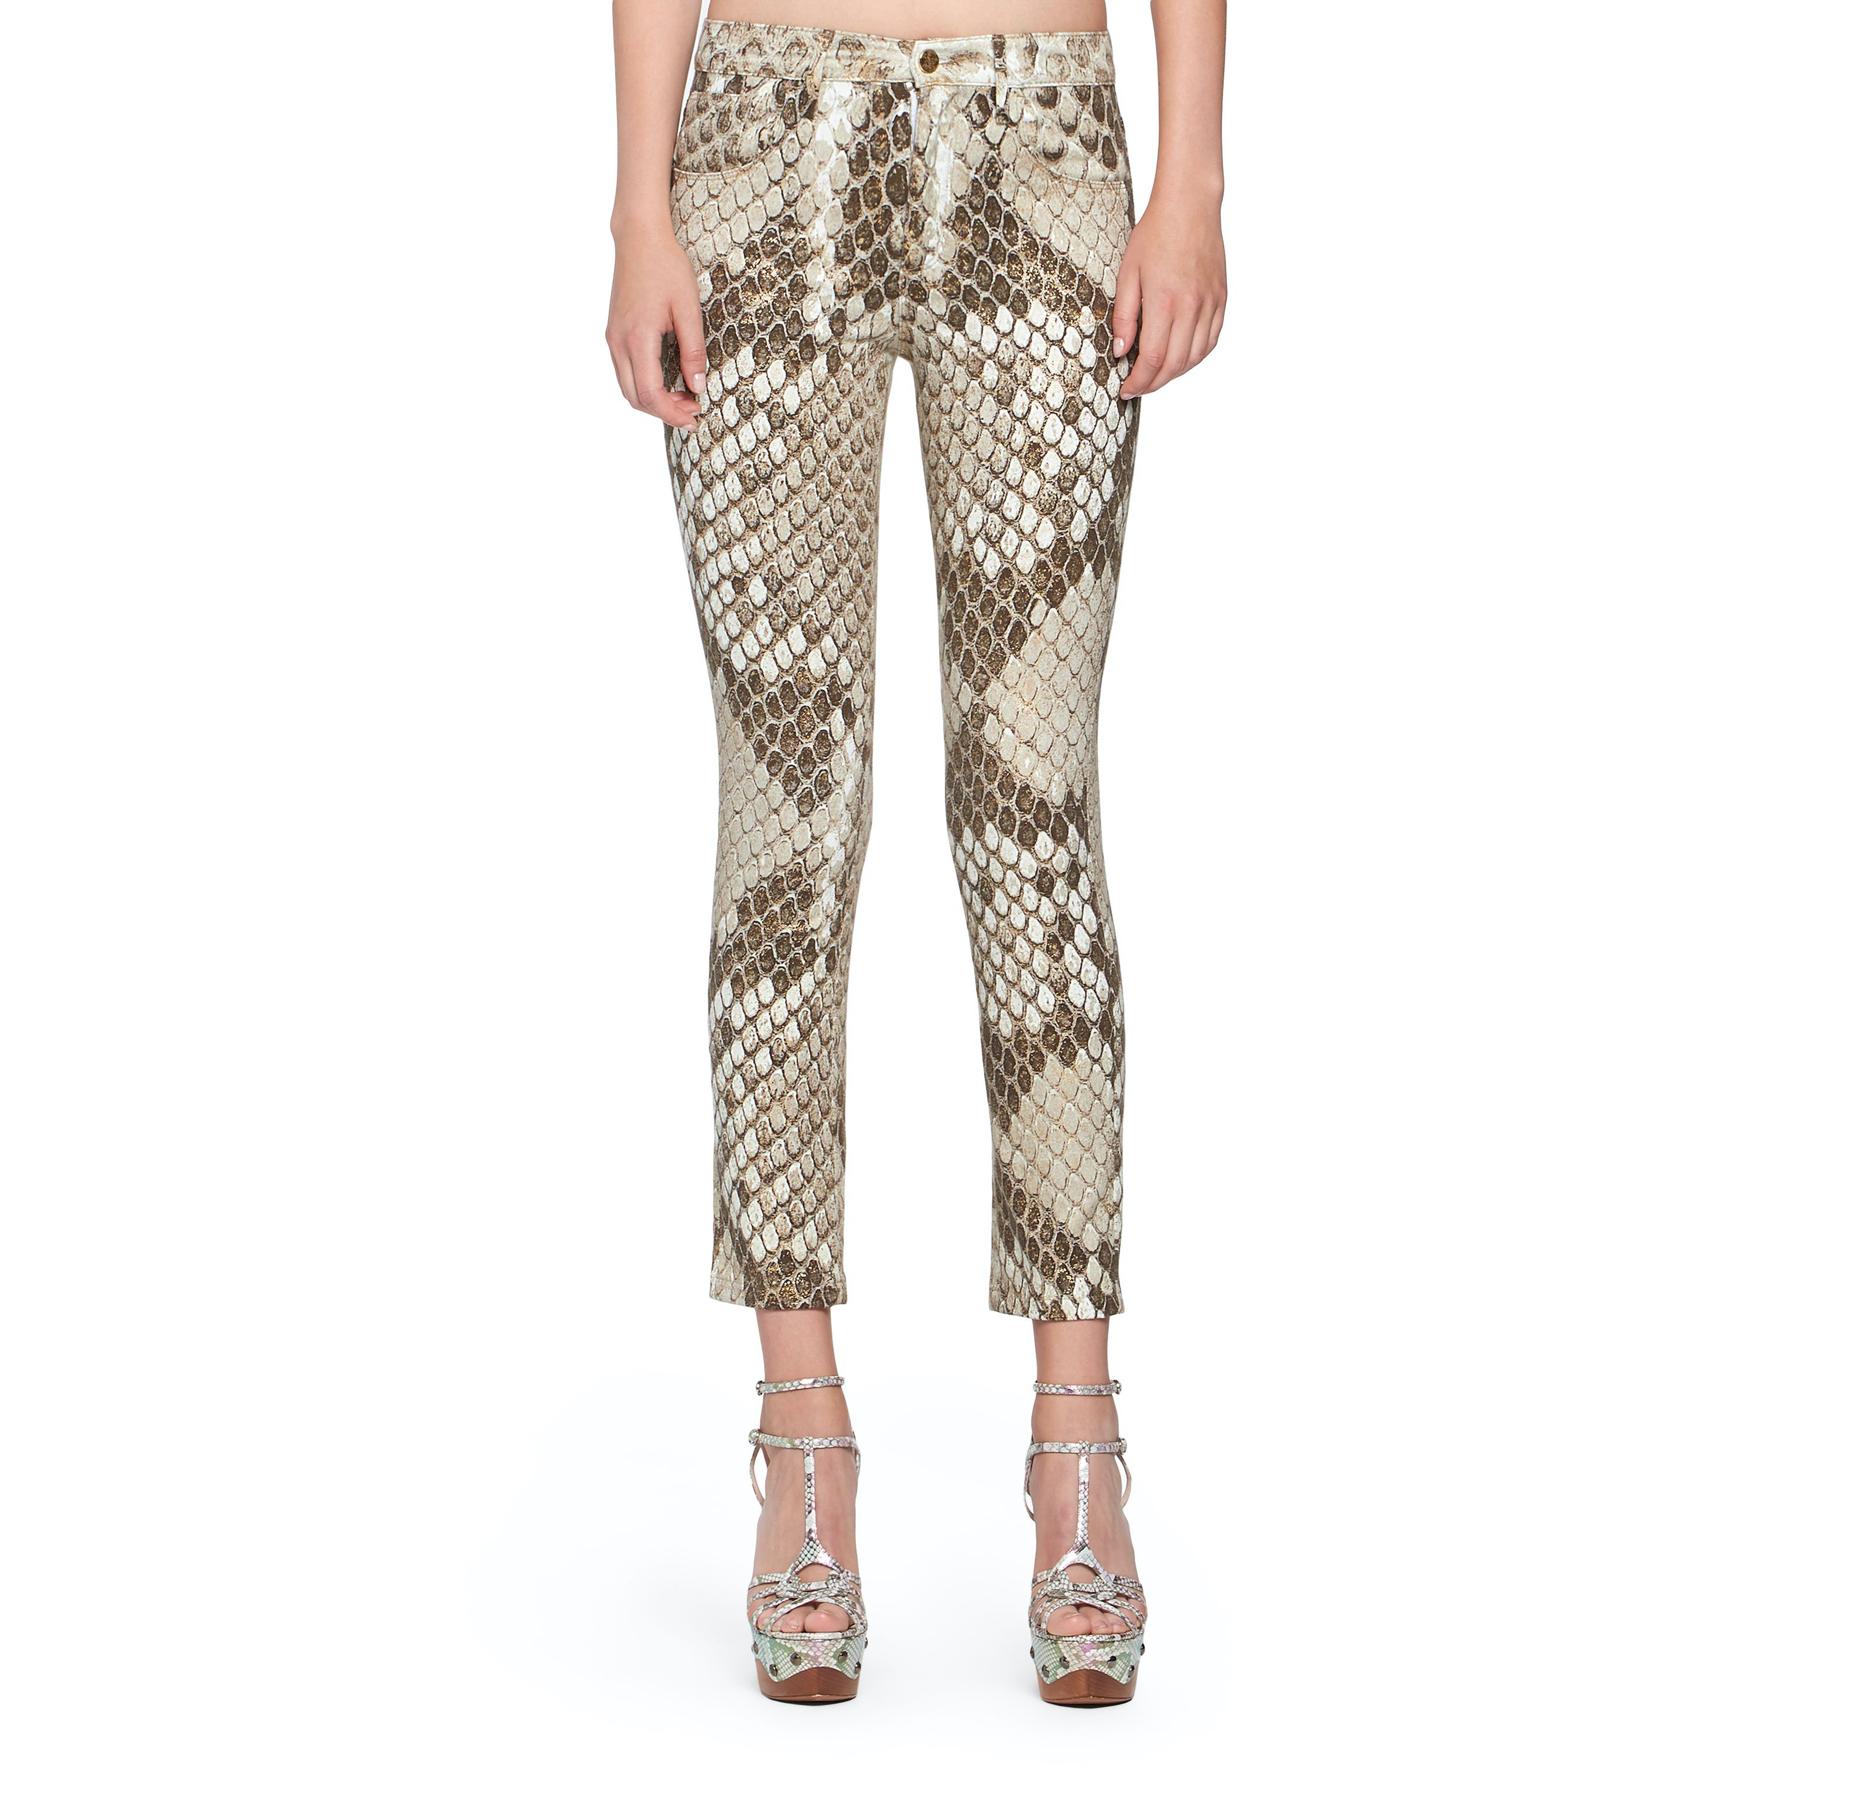 These Roberto Cavalli Serpiente skinny jeans feature a snakeskin print with gold detailing, a skinny flare silhouette, five buttons, and button and zipper closure. Brand new with tags. Made in Italy.

Size: 42 (IT)

Measurements:
Total Length: 40